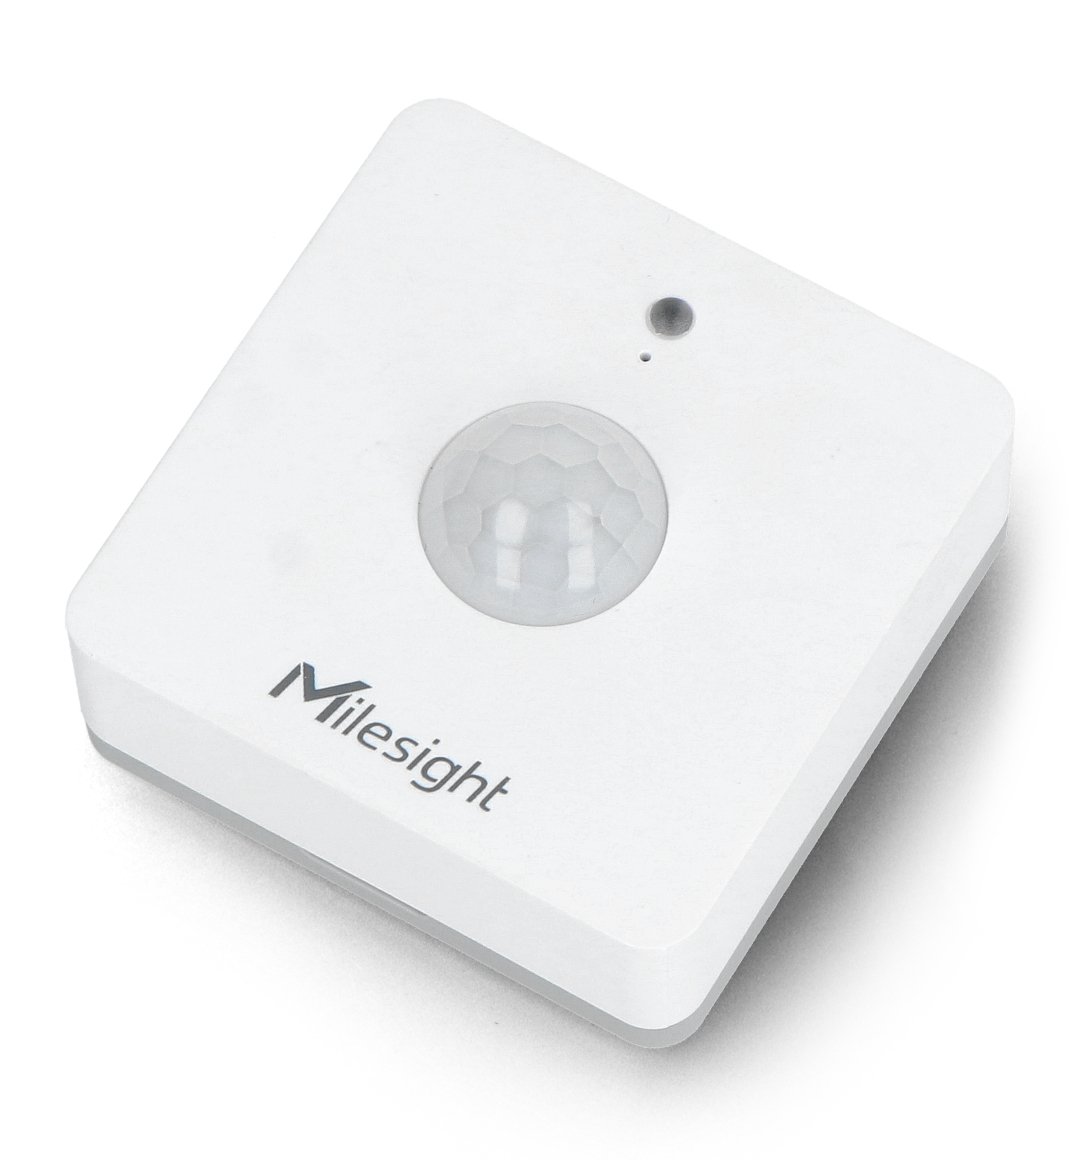 The Milesight light and motion sensor lies on a white background.